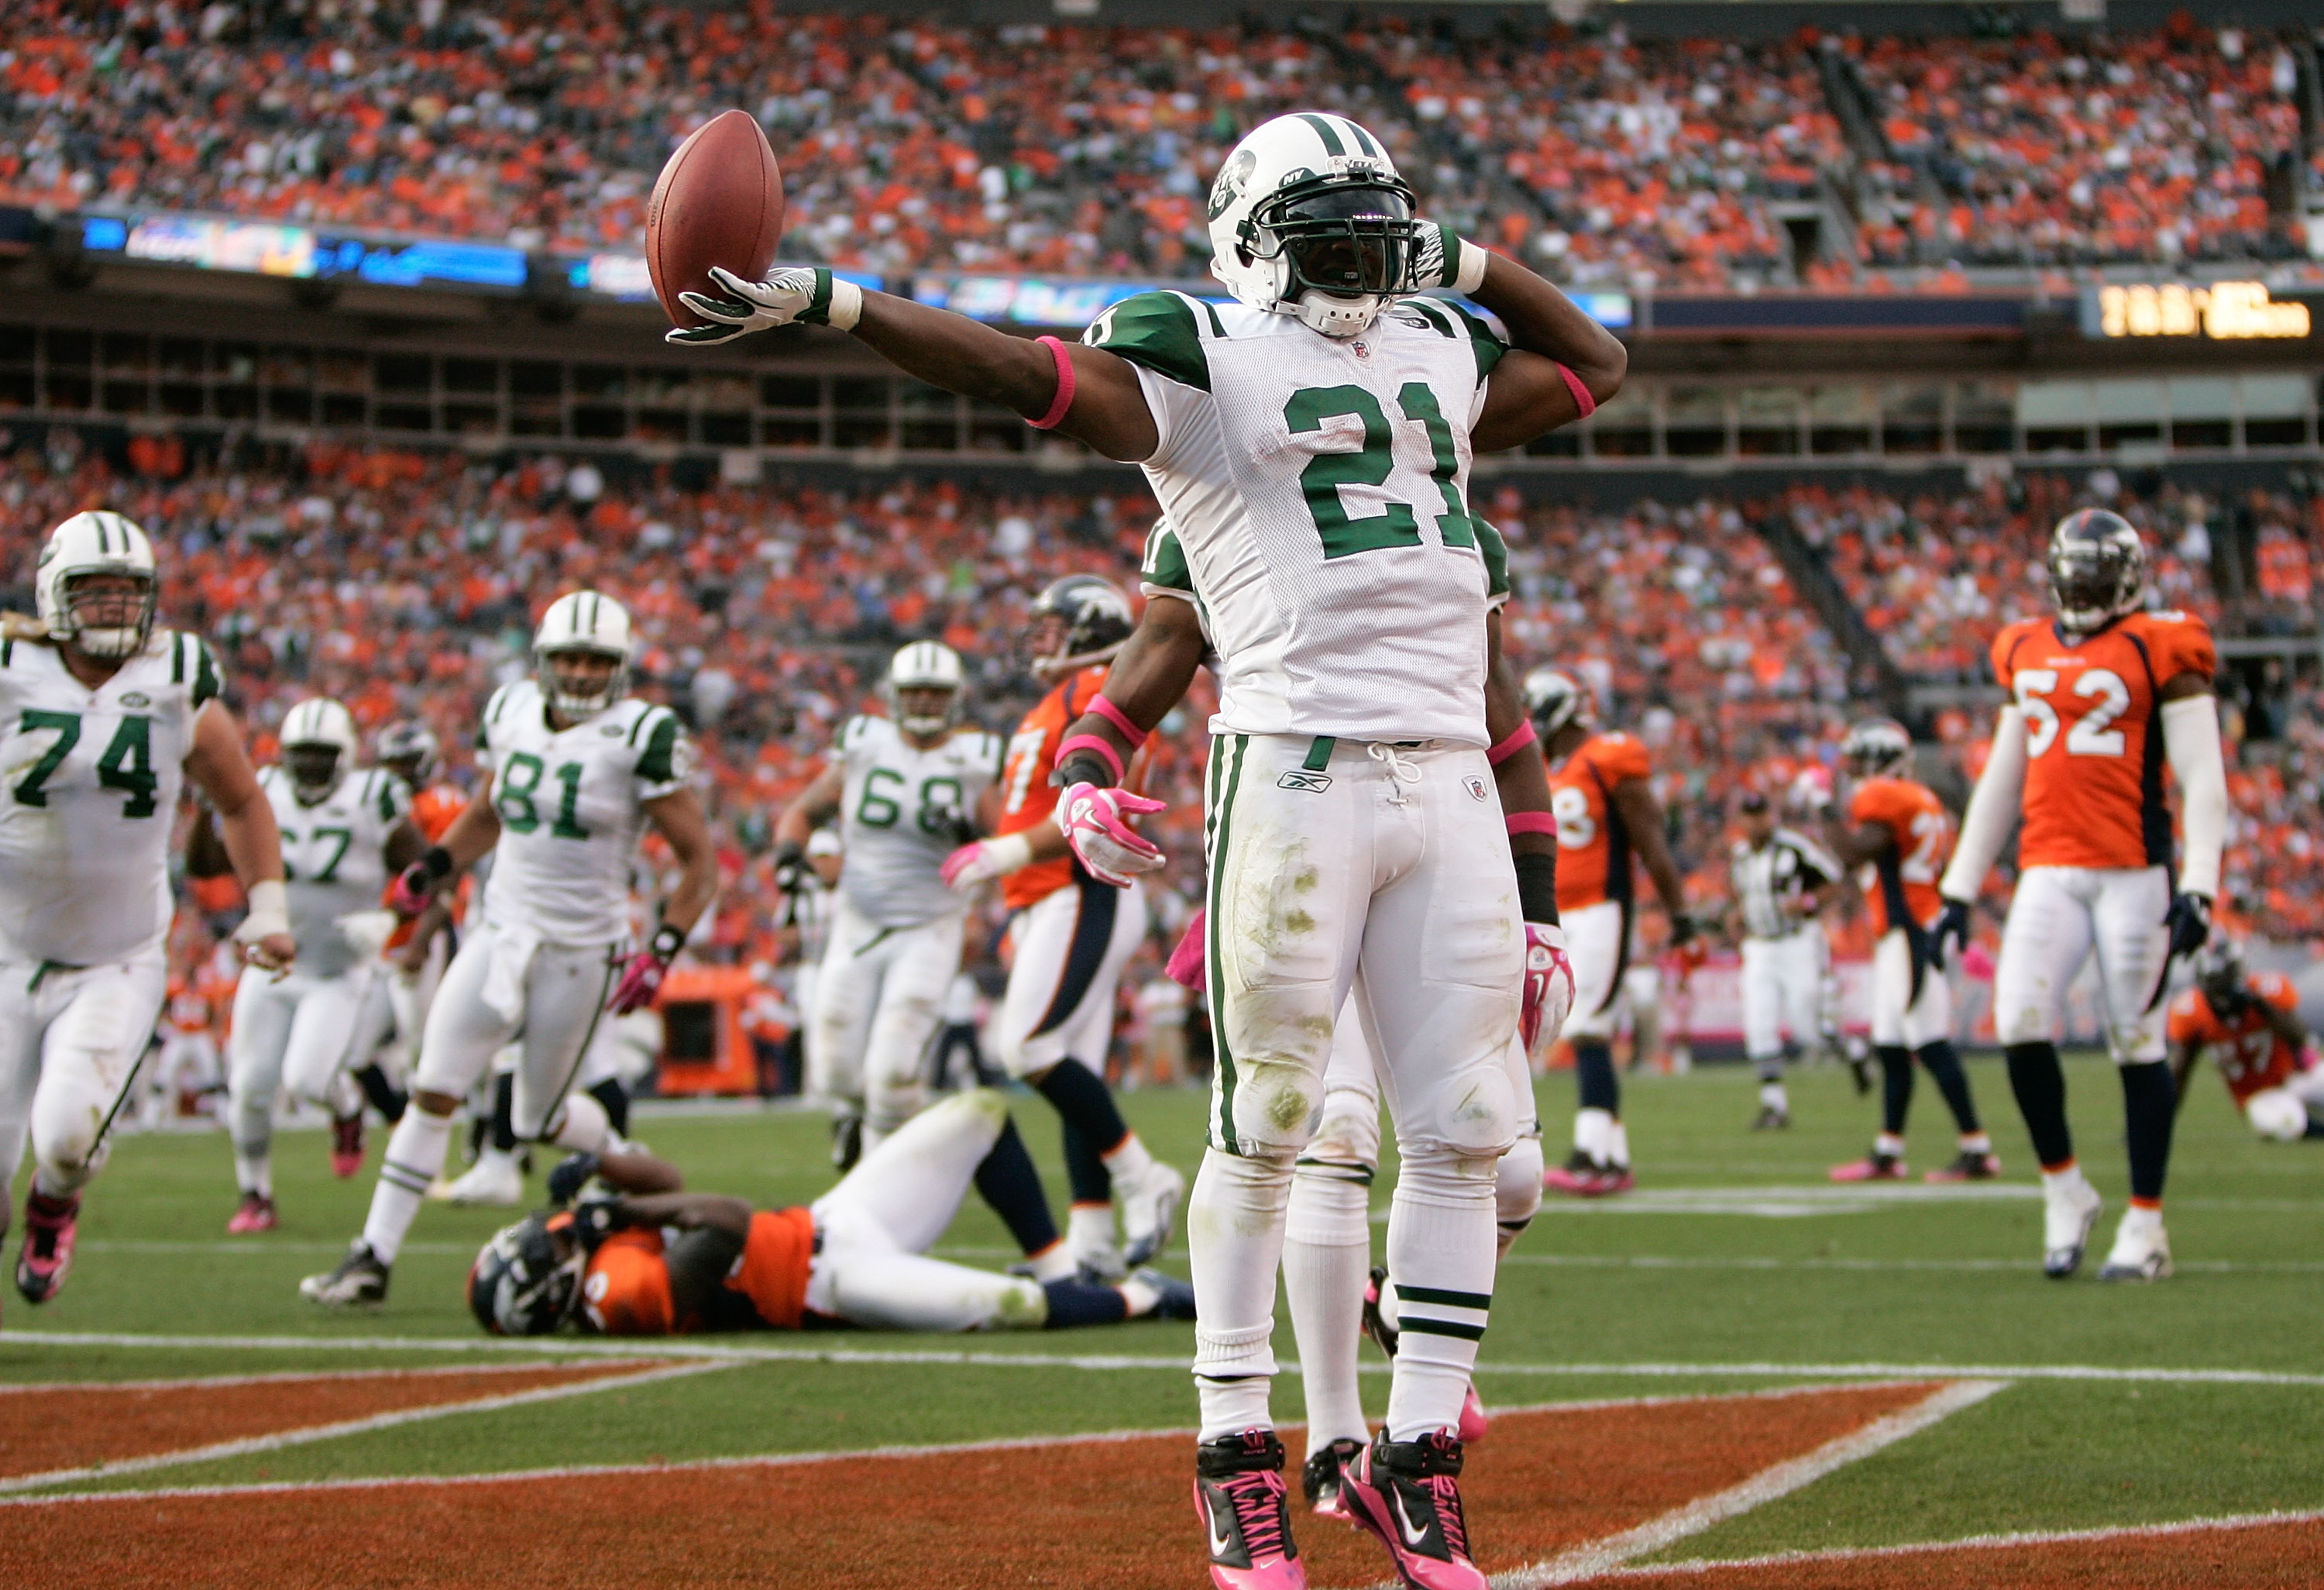 DENVER - OCTOBER 17:  Running back LaDainian Tomlinson #21 of the New York Jets celebrates his touchdown against the Denver Broncos at INVESCO Field at Mile High on October 17, 2010 in Denver, Colorado.  (Photo by Justin Edmonds/Getty Images)